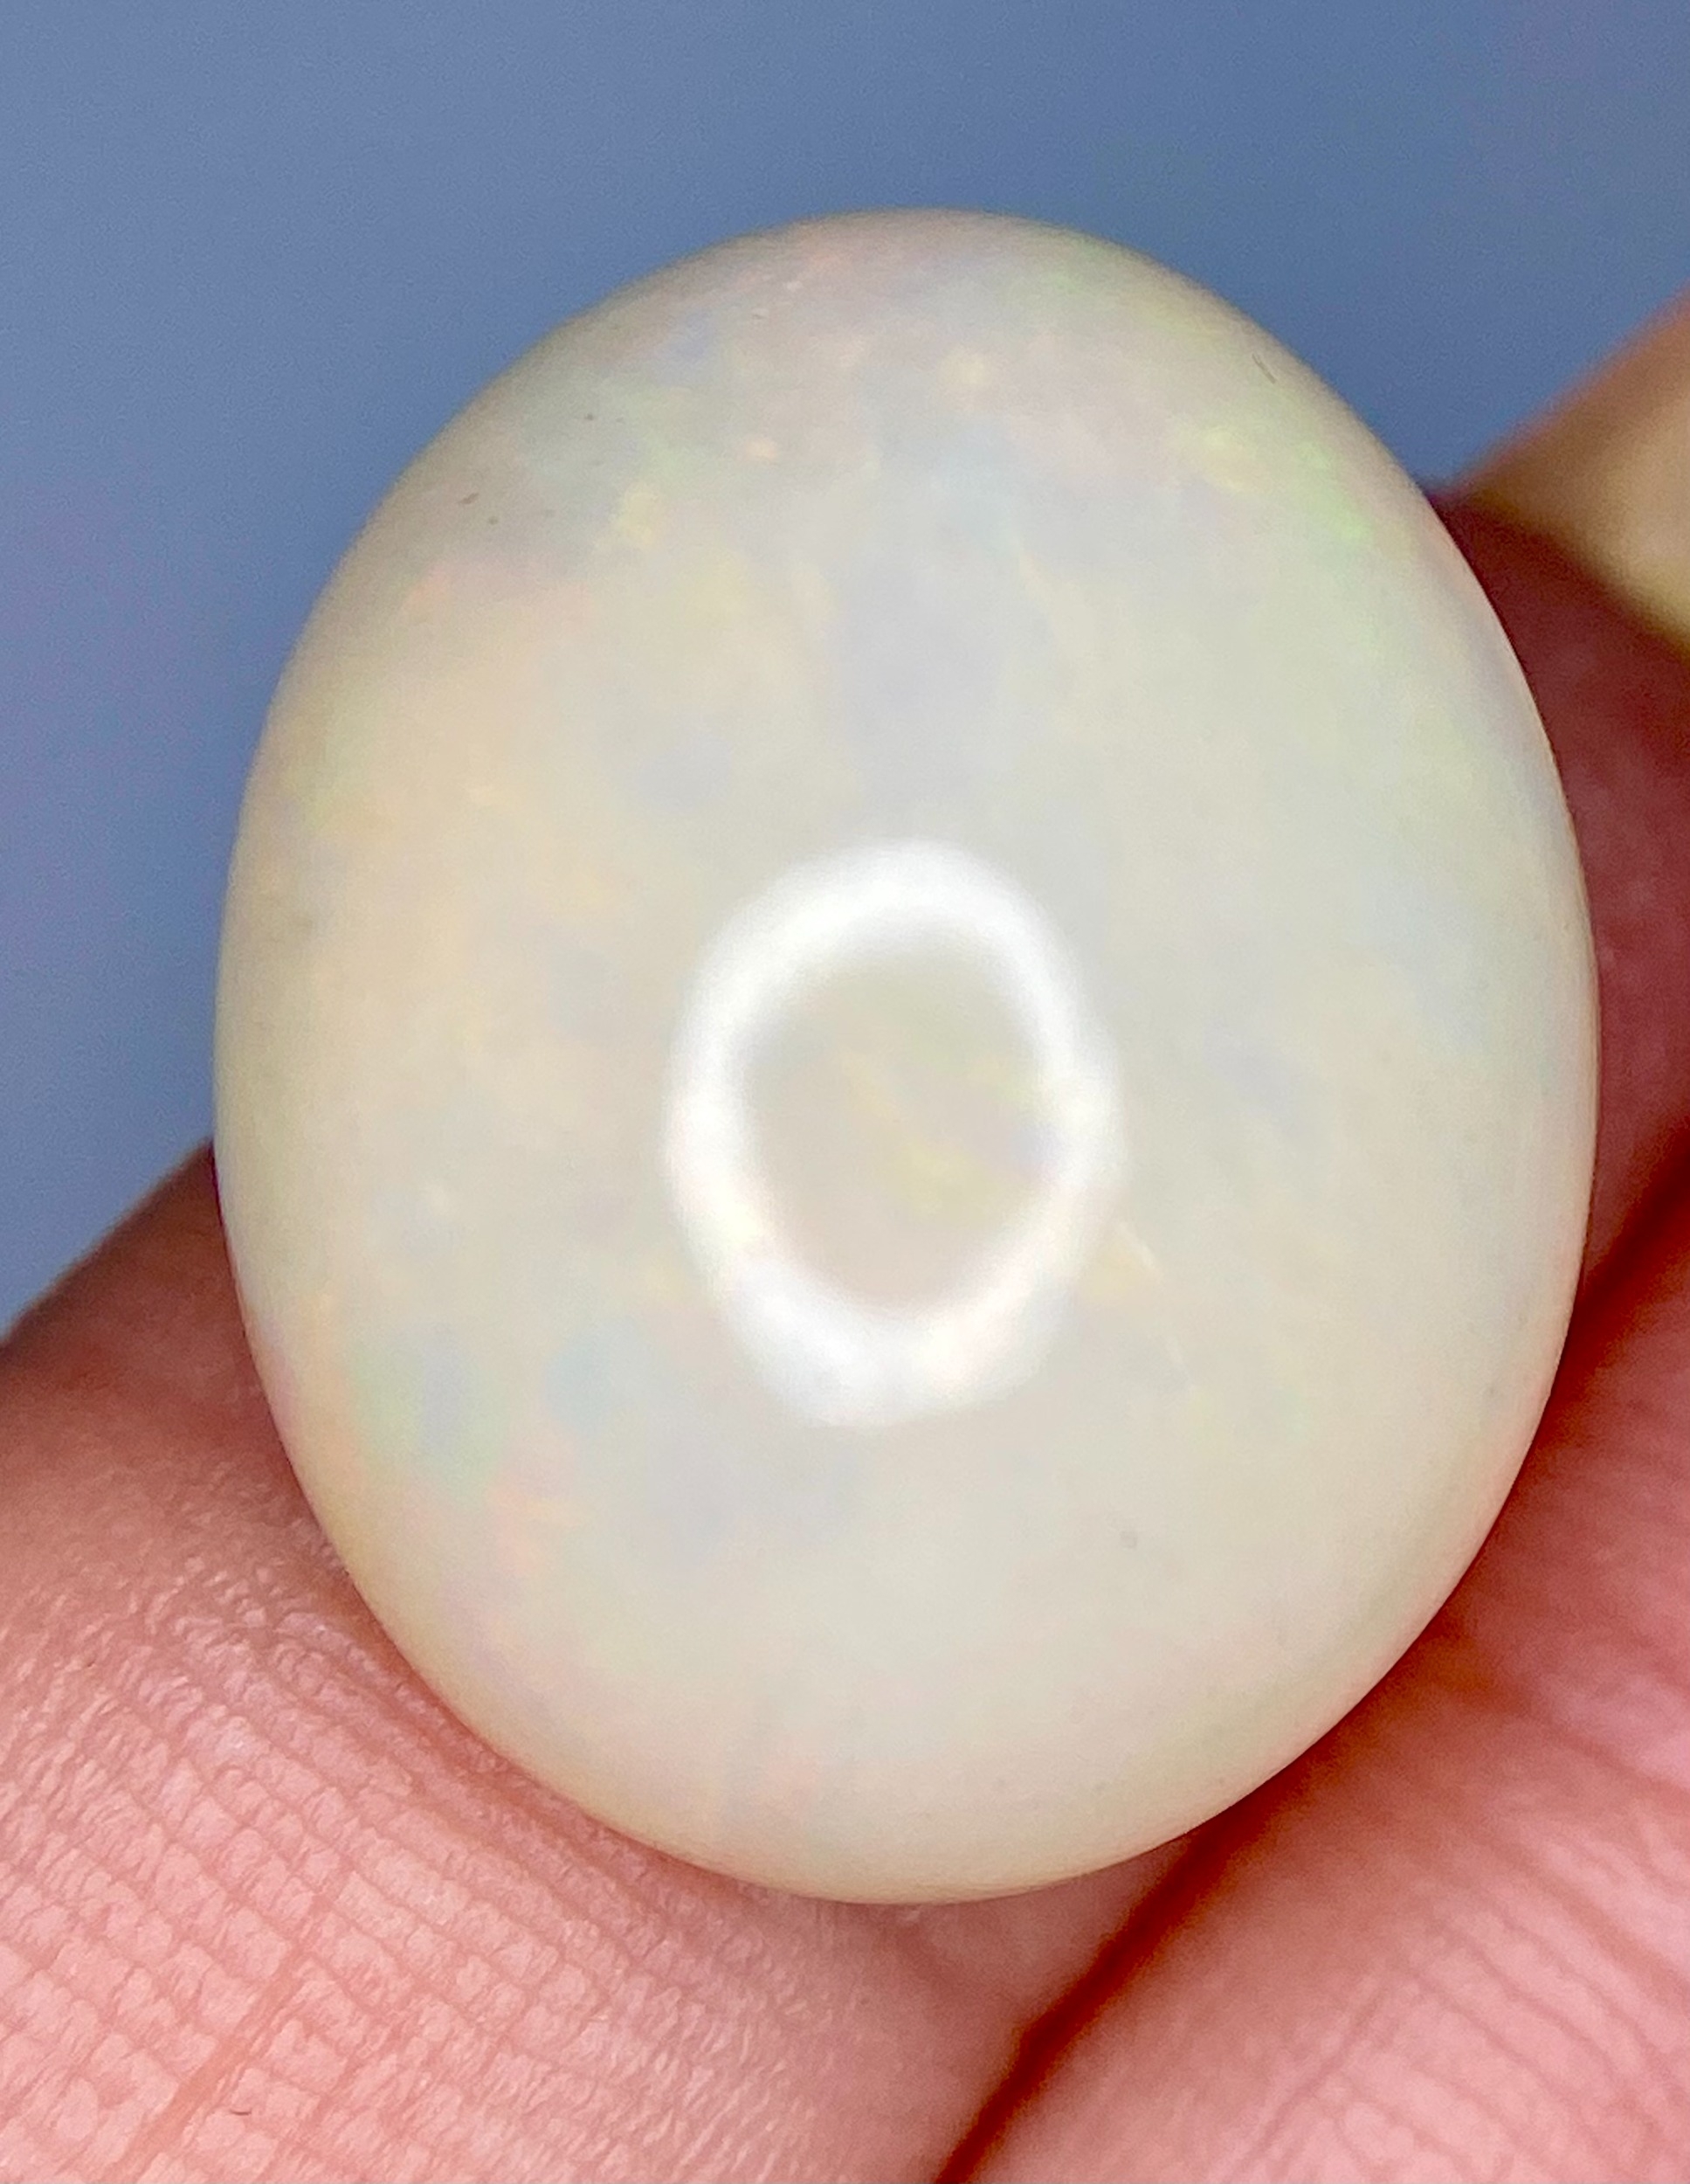 An 18.14ct Large Ethiopian Opal Gemstone - ITLGR Certified. - Image 3 of 4